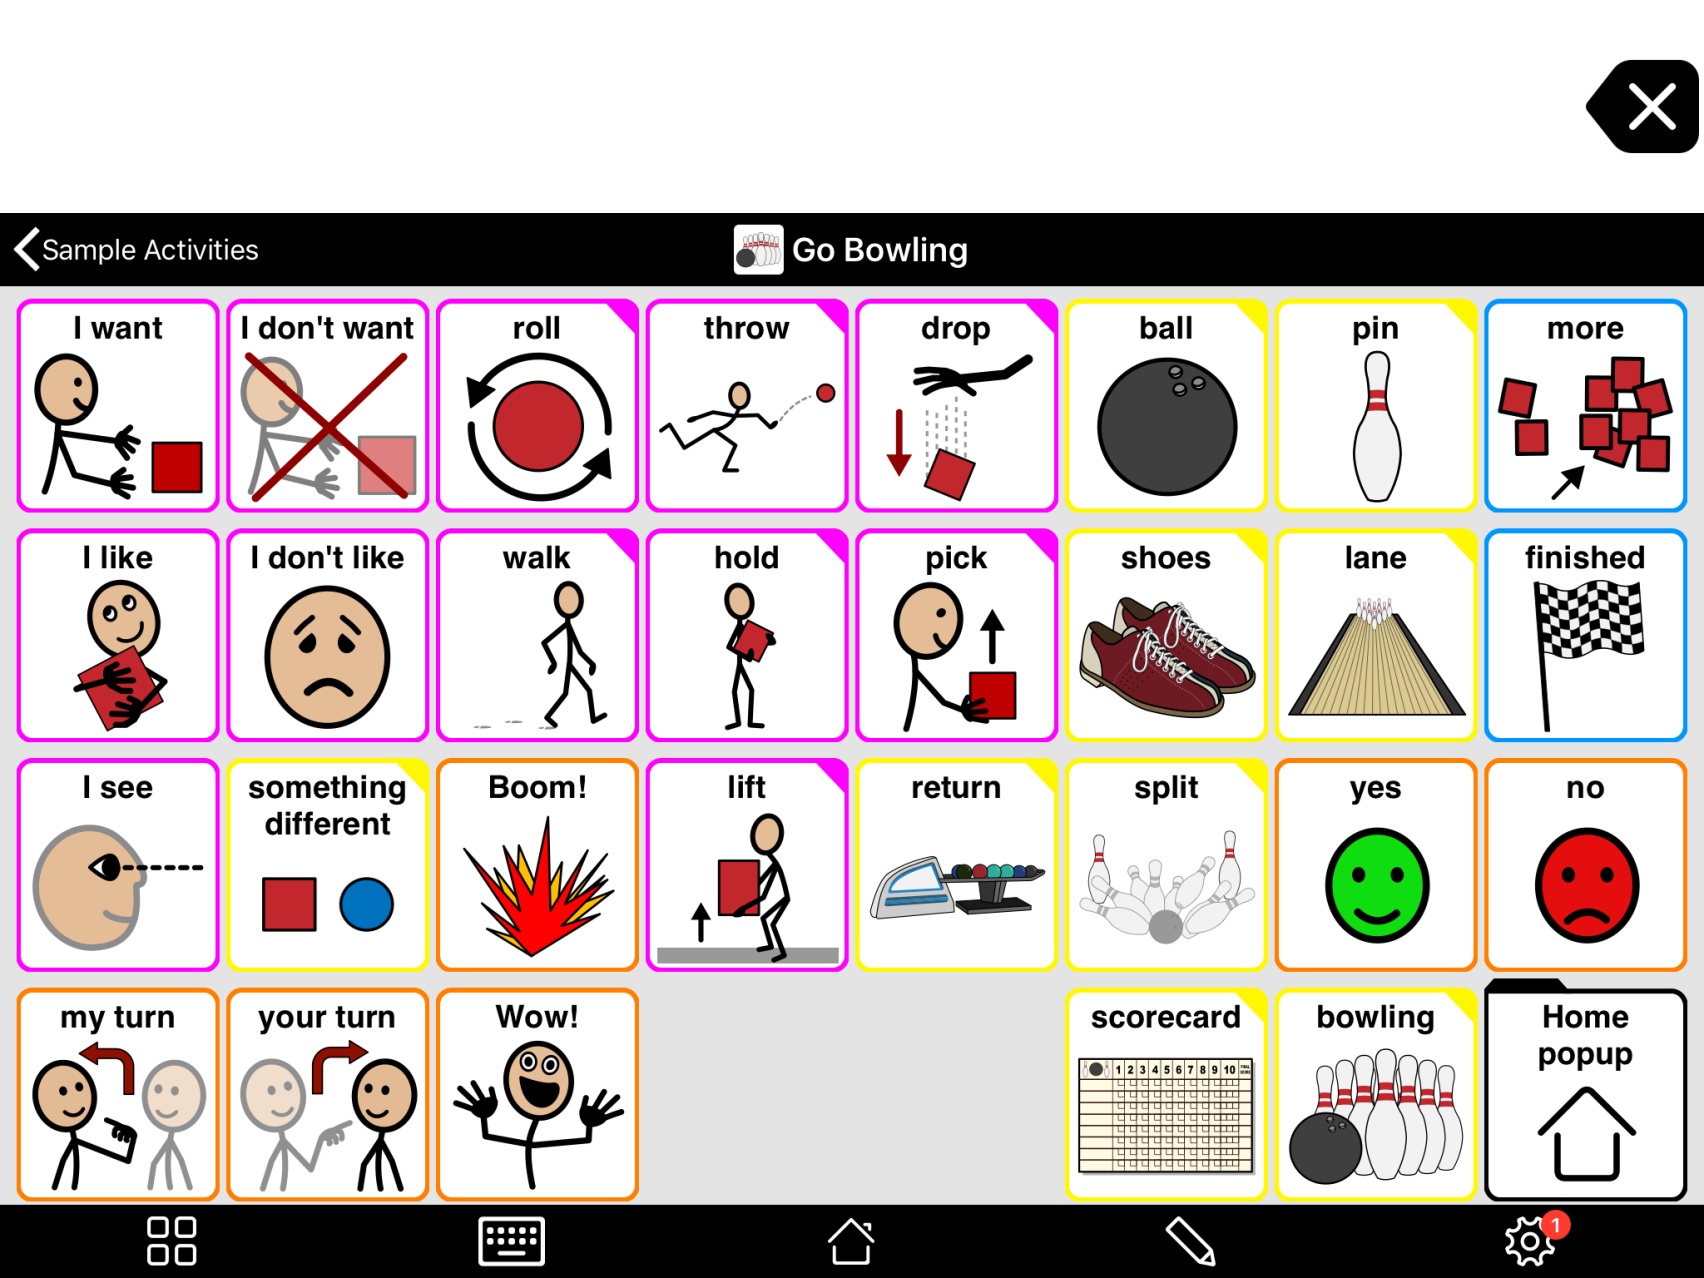 Bowling Vocabulary. Bowling Words. Vocabulary for Bowling. Приложение activites. Boards topic